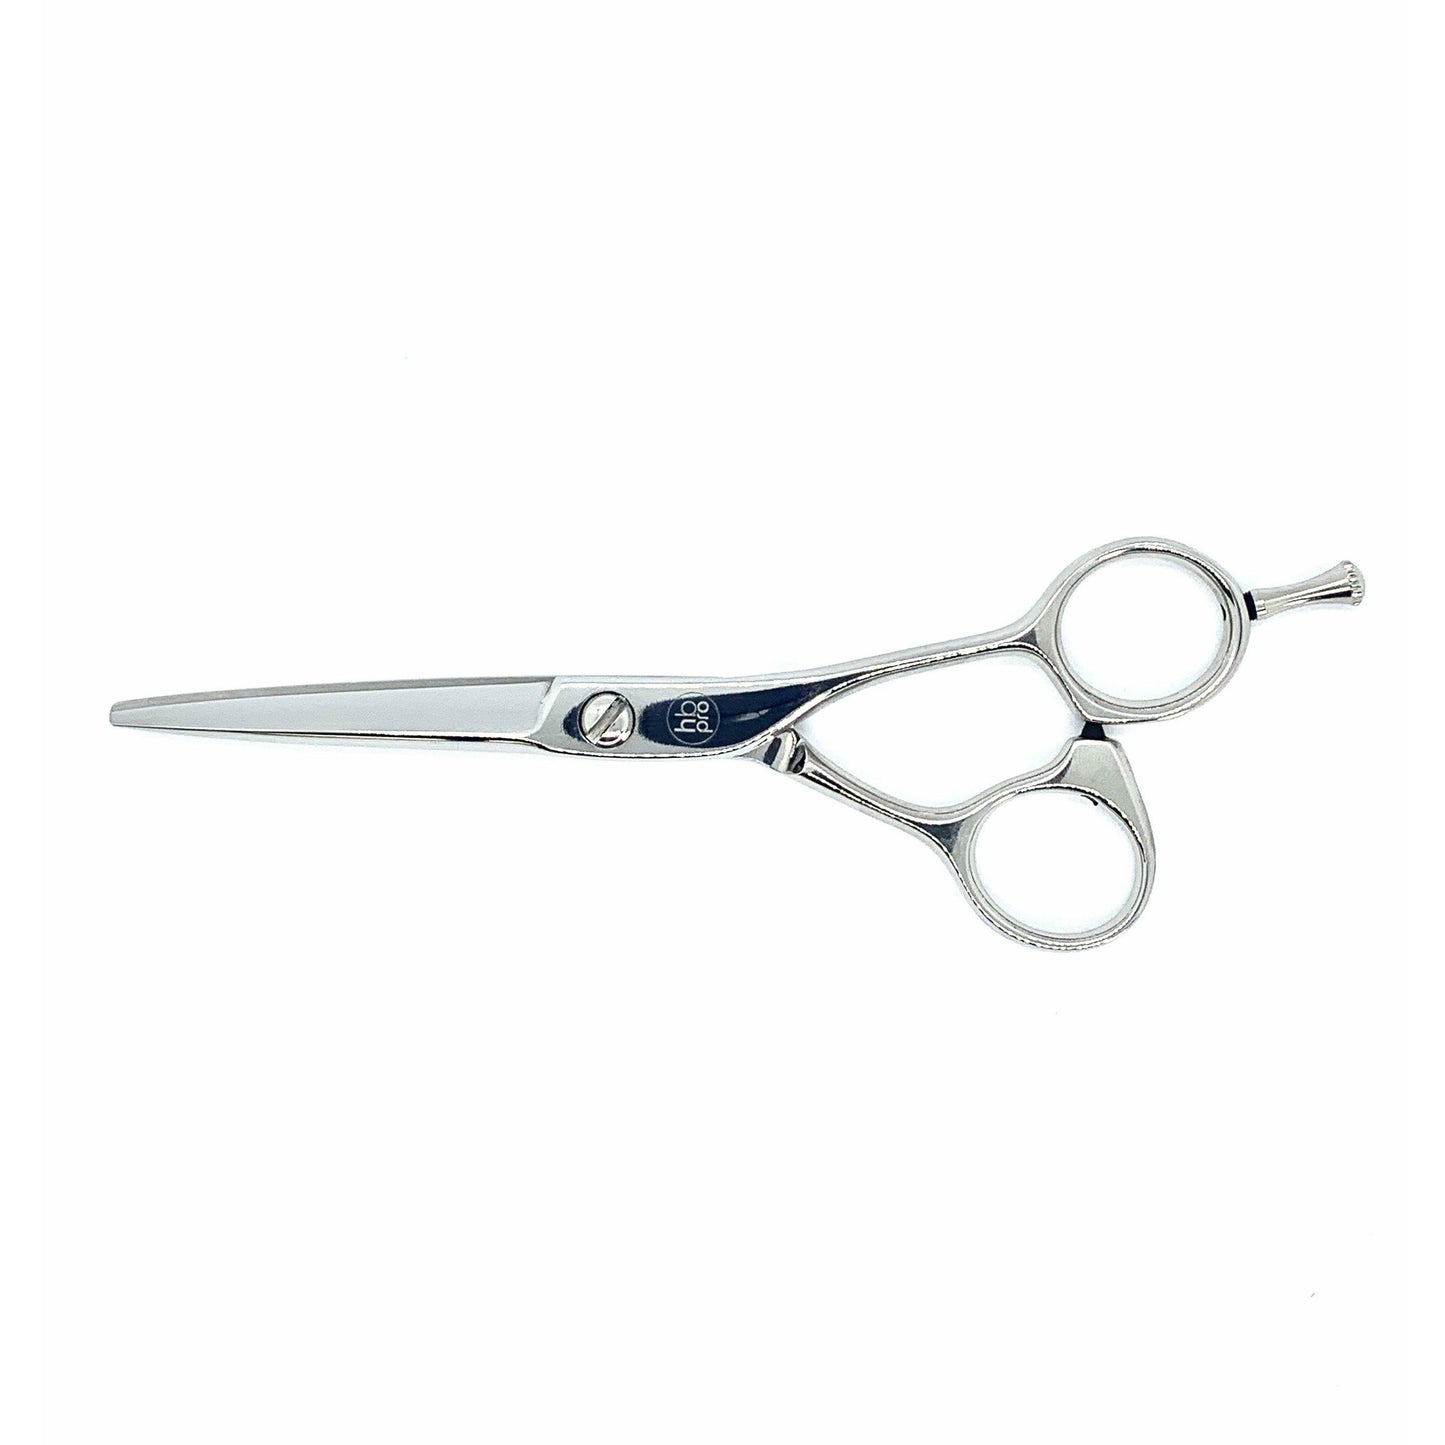 HbPro One Scissors Hairbrained 5.5" 